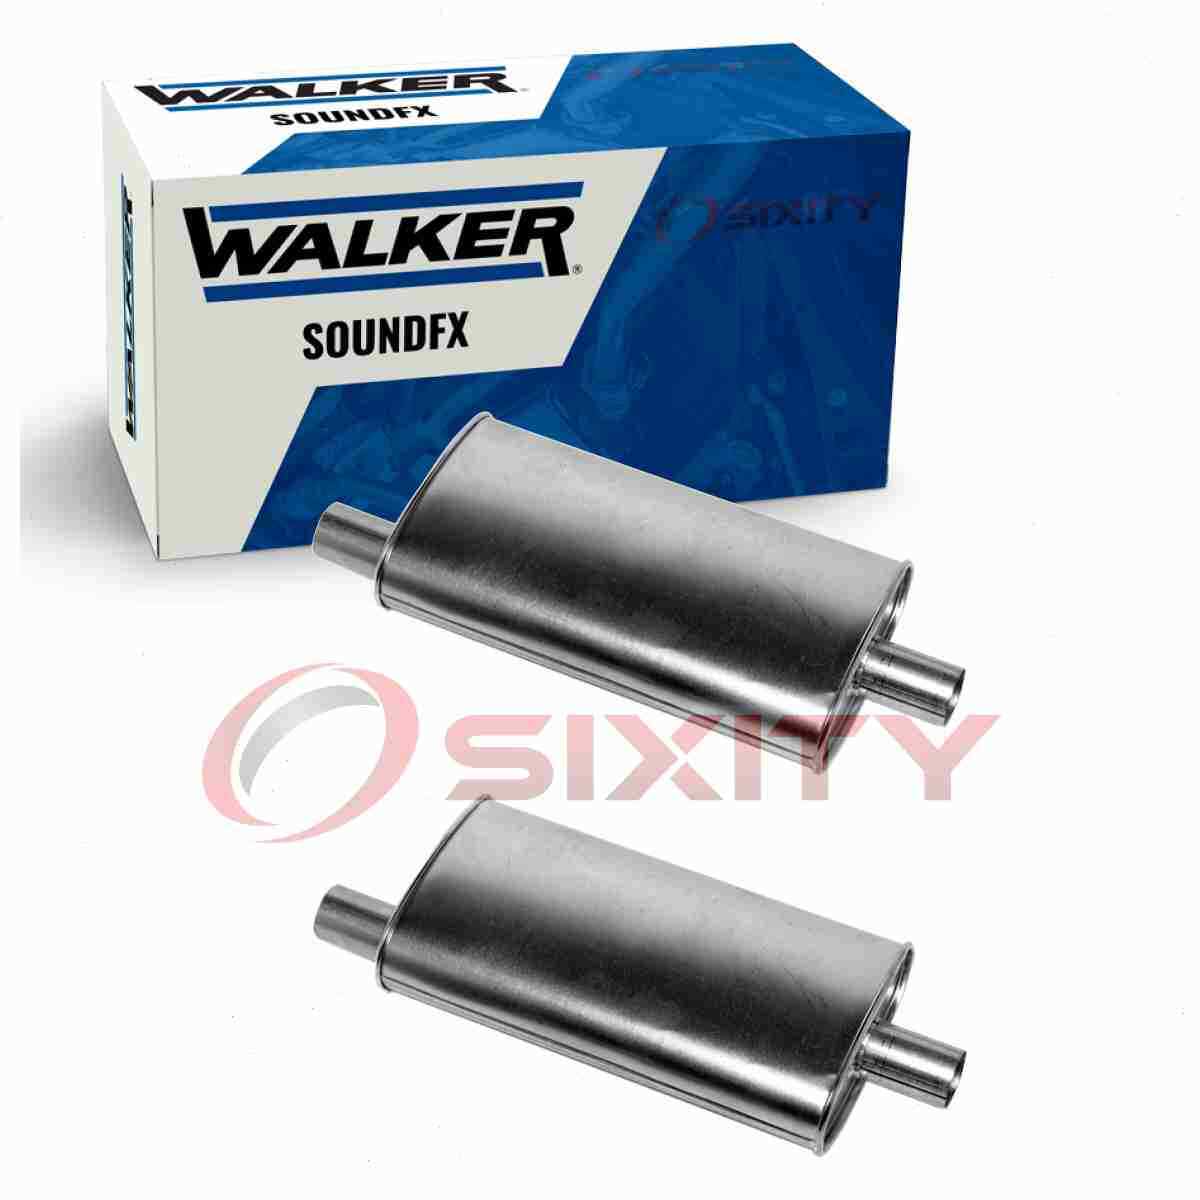 2 pc Walker SoundFX Exhaust Mufflers for 1968-1974 Plymouth Road Runner 5.2L oy